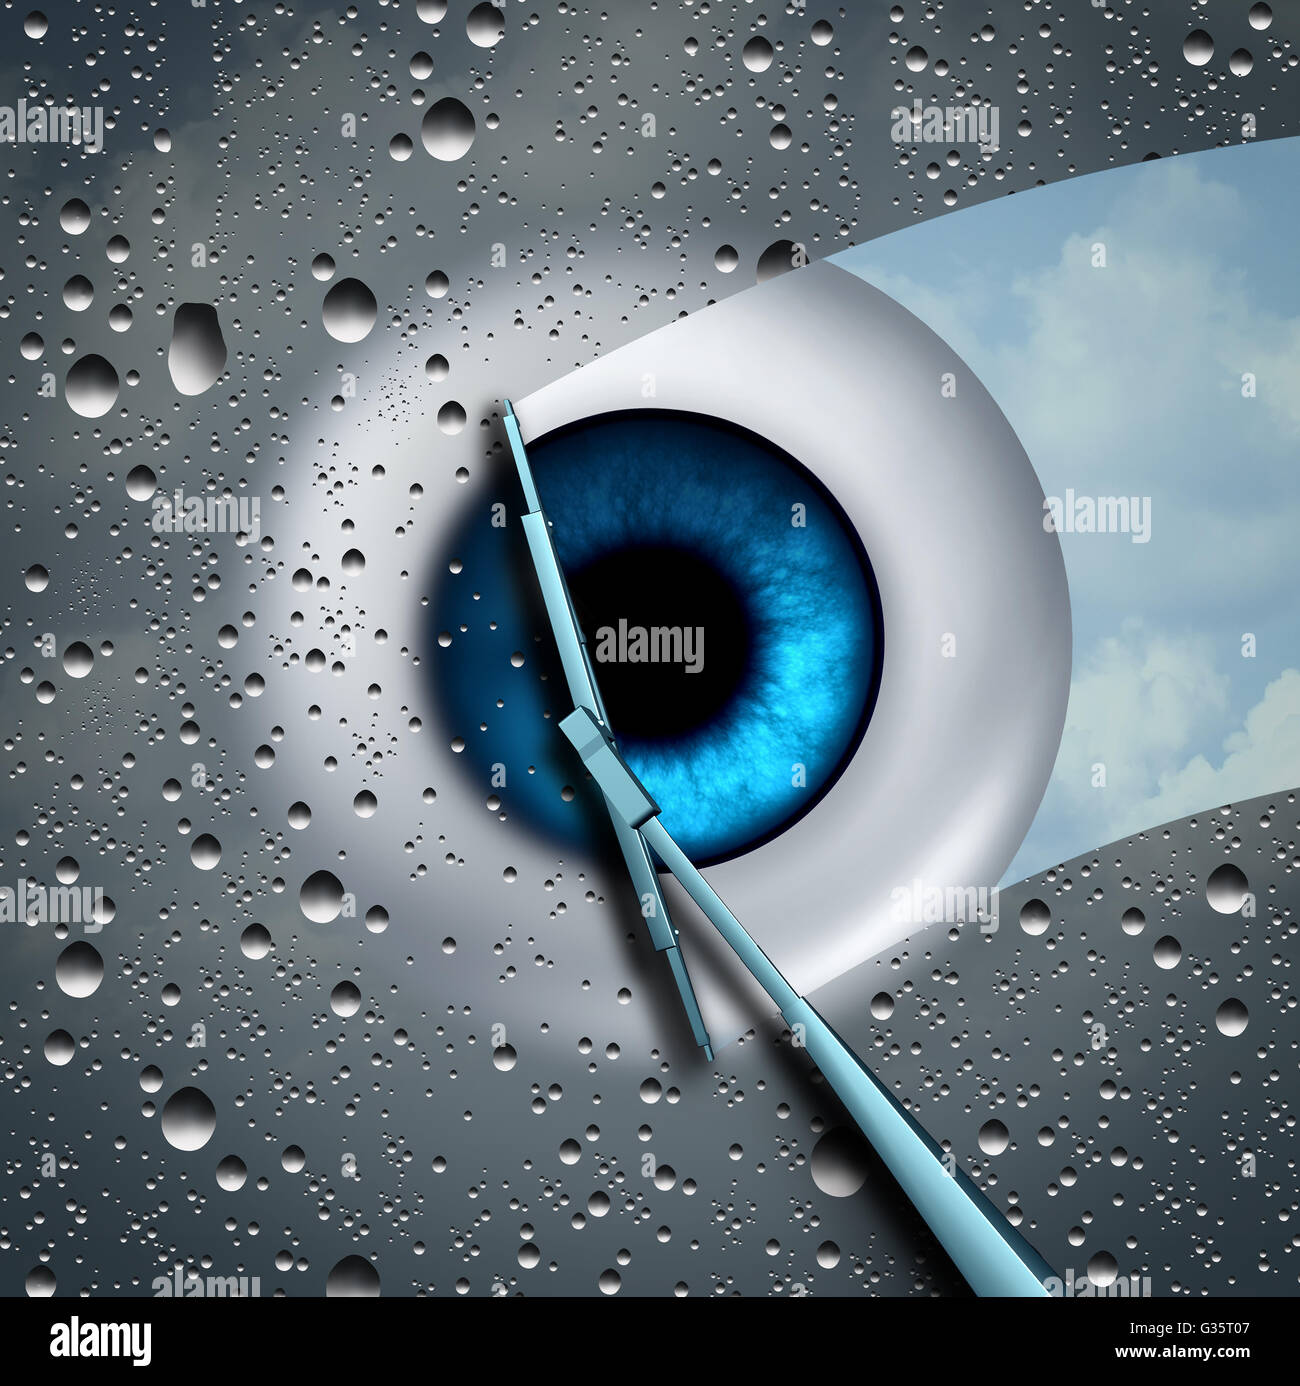 Eye care or eyecare health concept as a wet glass in front of an eyeball being wiped clean with a wiper as a optometry or ophthalmology medicine symbol with 3D illustration elements. Stock Photo